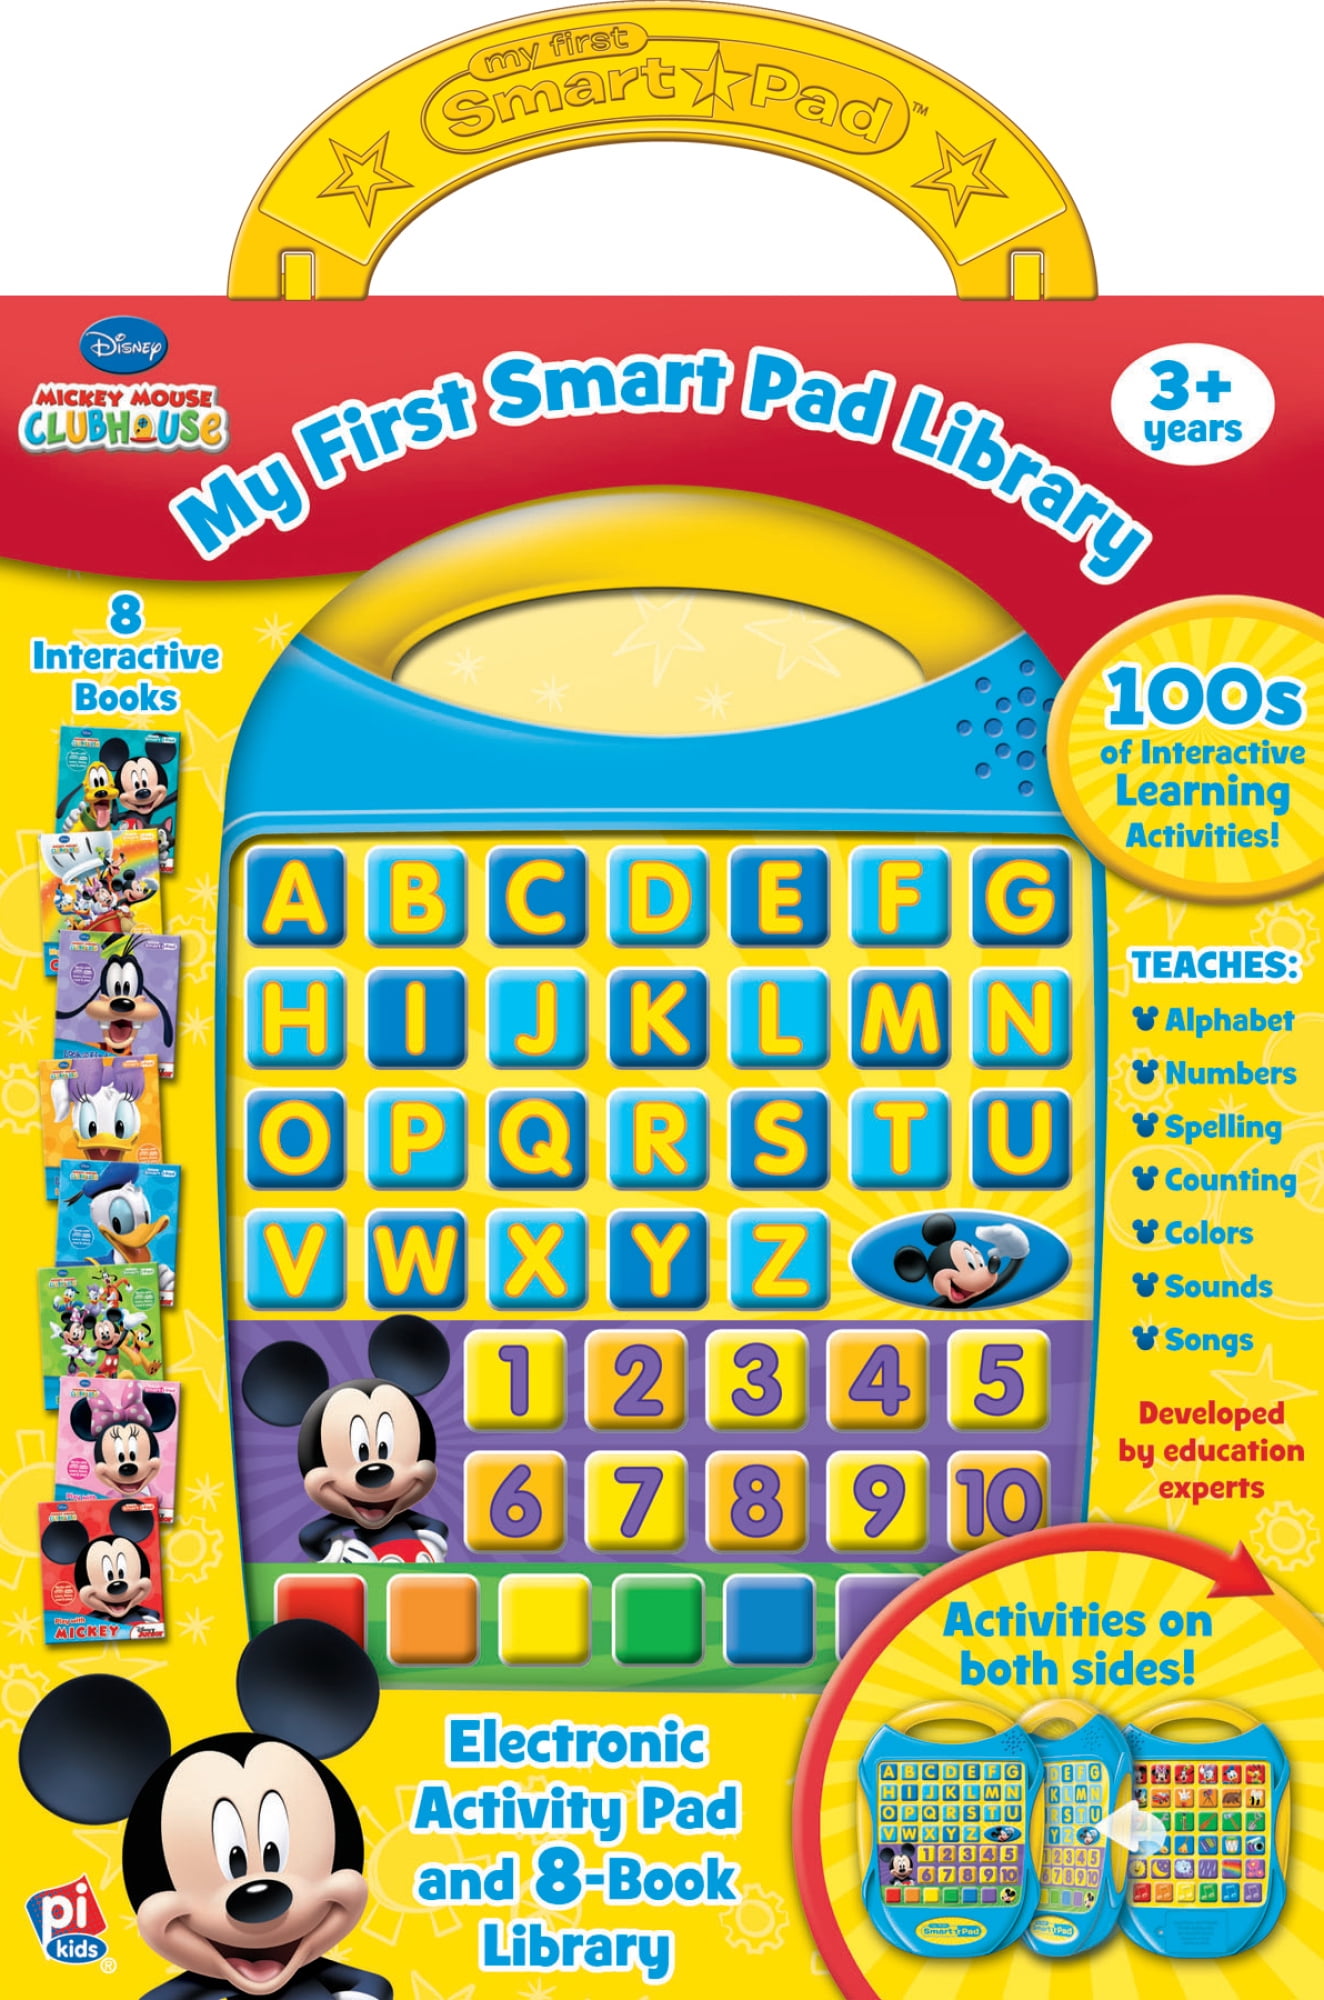 Disney Mickey Mouse Clubhouse - My First Smart Pad Electronic Activity Pad  and 8-Book Library - PI Kids